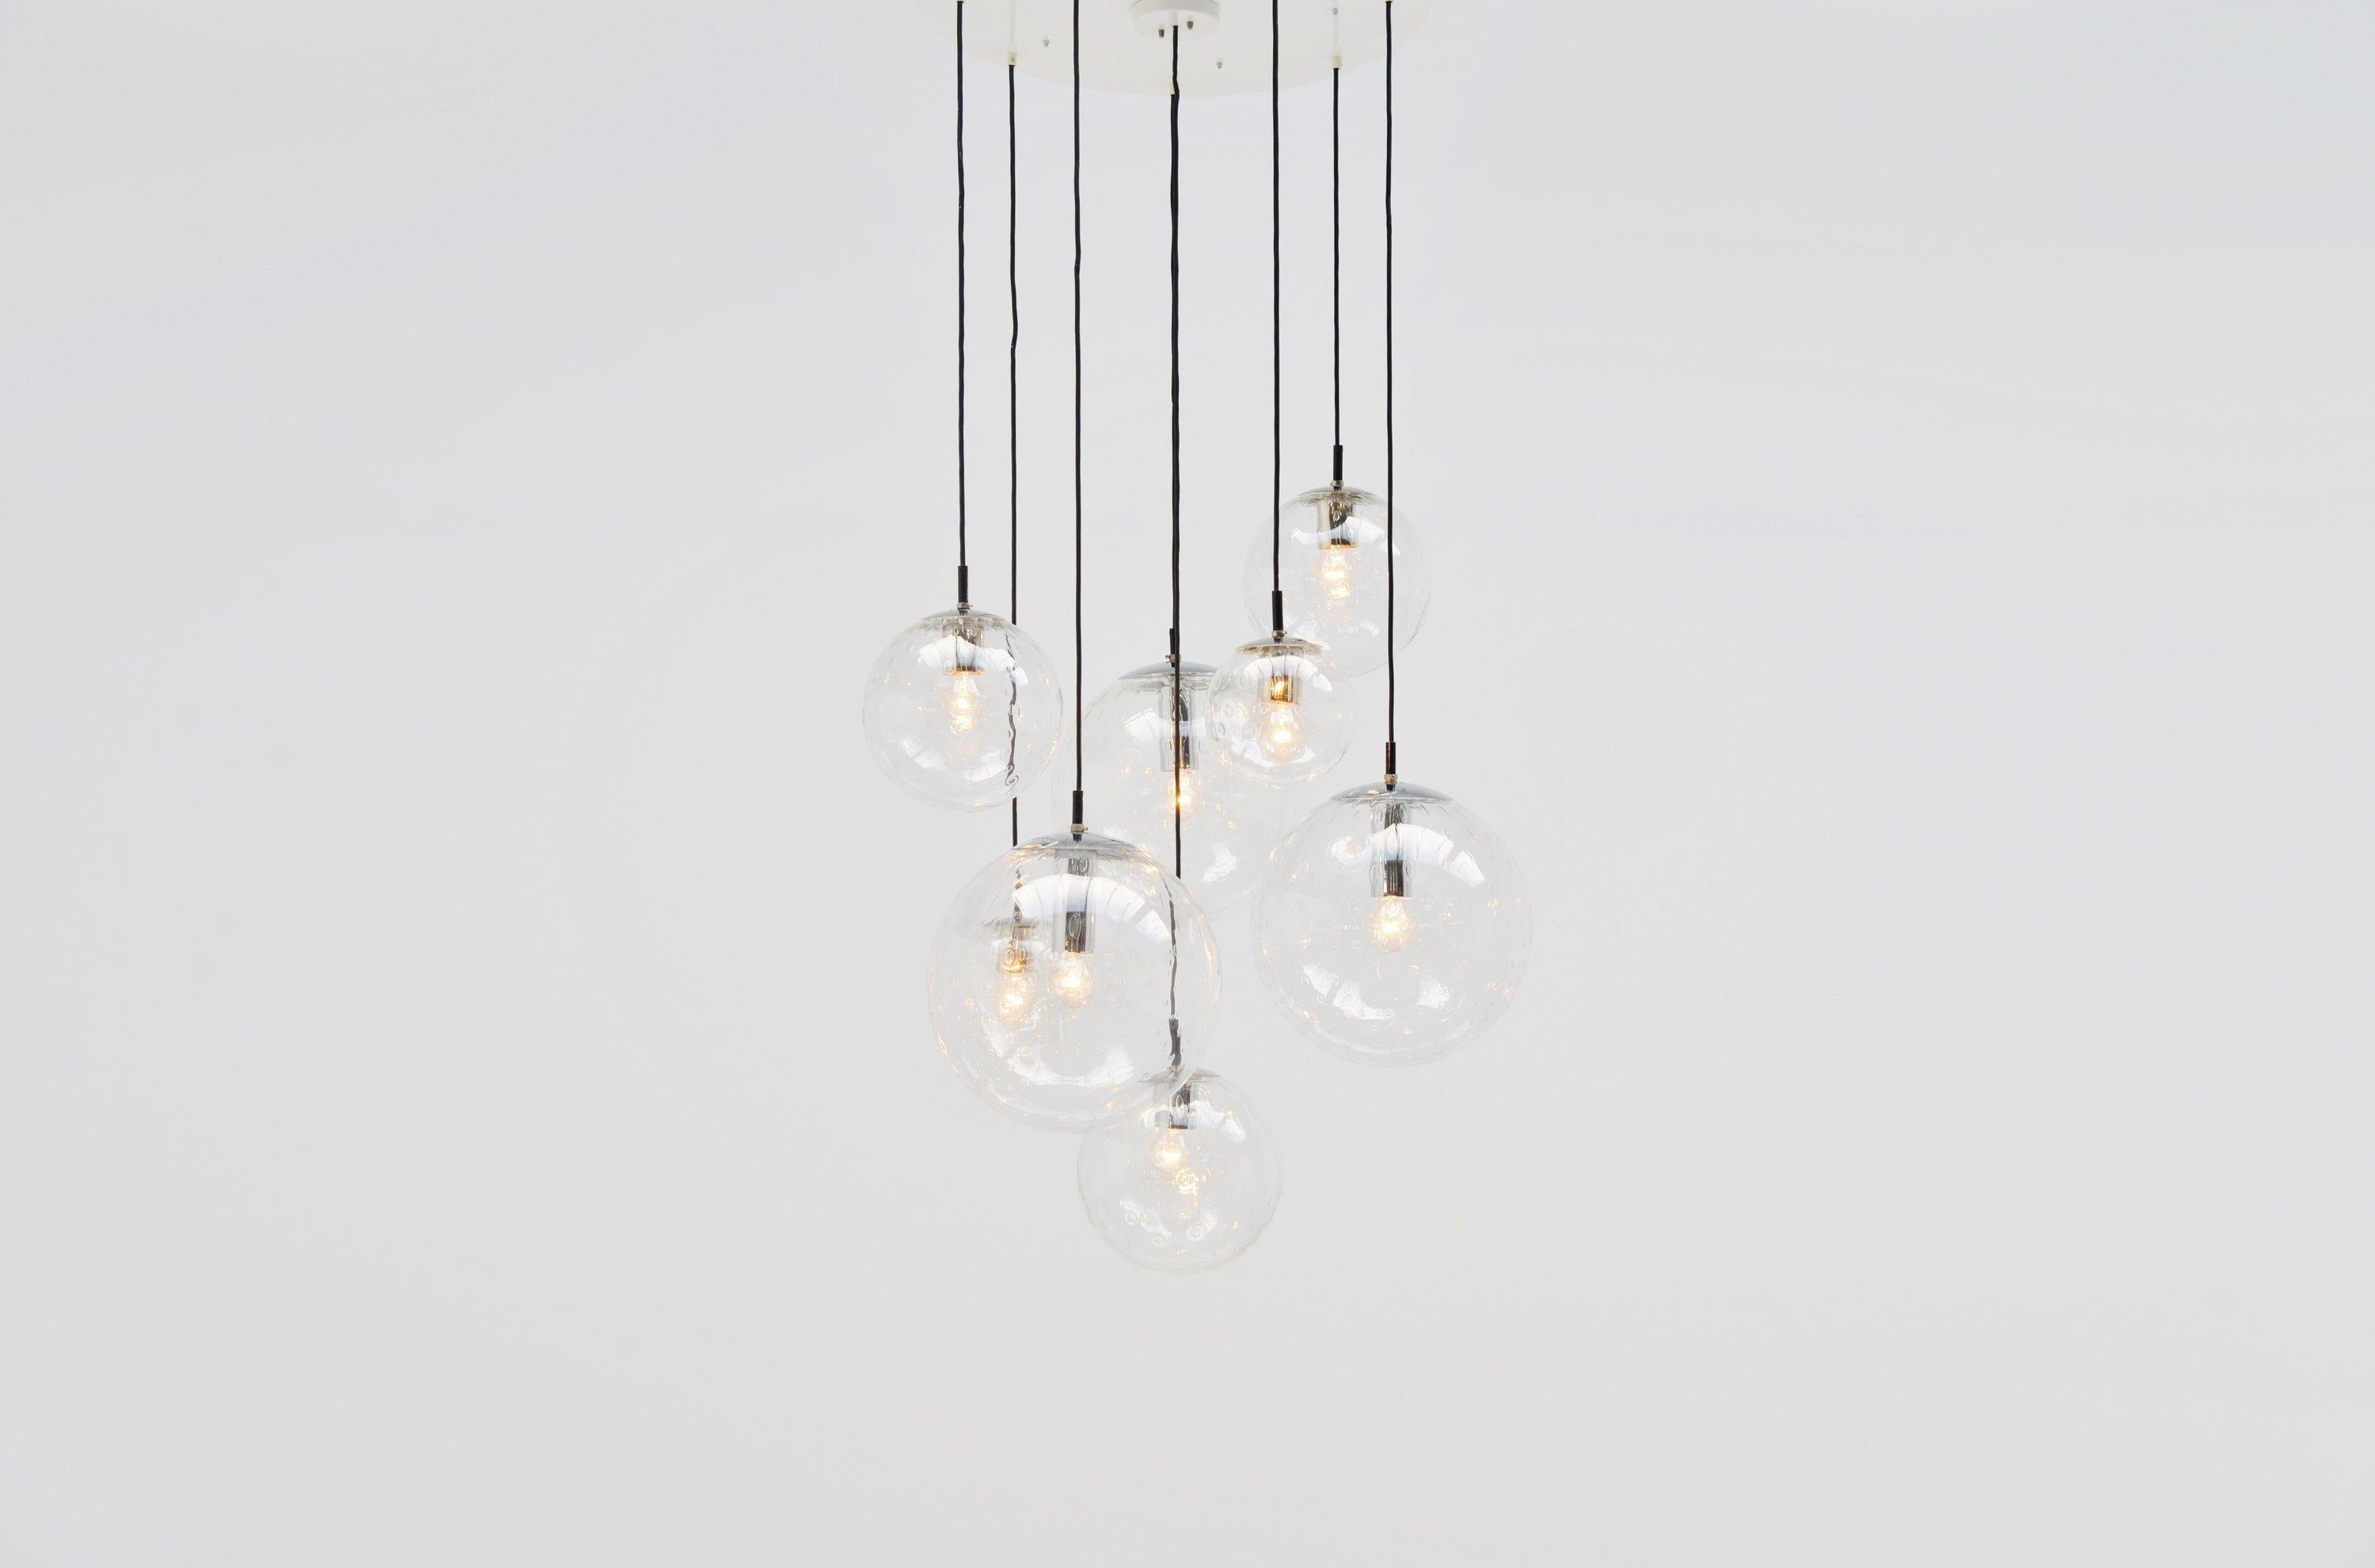 Huge raindrops chandelier designed and manufactured by RAAK Amsterdam, Holland, 1975. This chandelier has 3 different sizes of raindrop globes hanging on a large white metal ceiling plate. 3 Large ones, 3 medium ones and 2 small ones. This lamp was